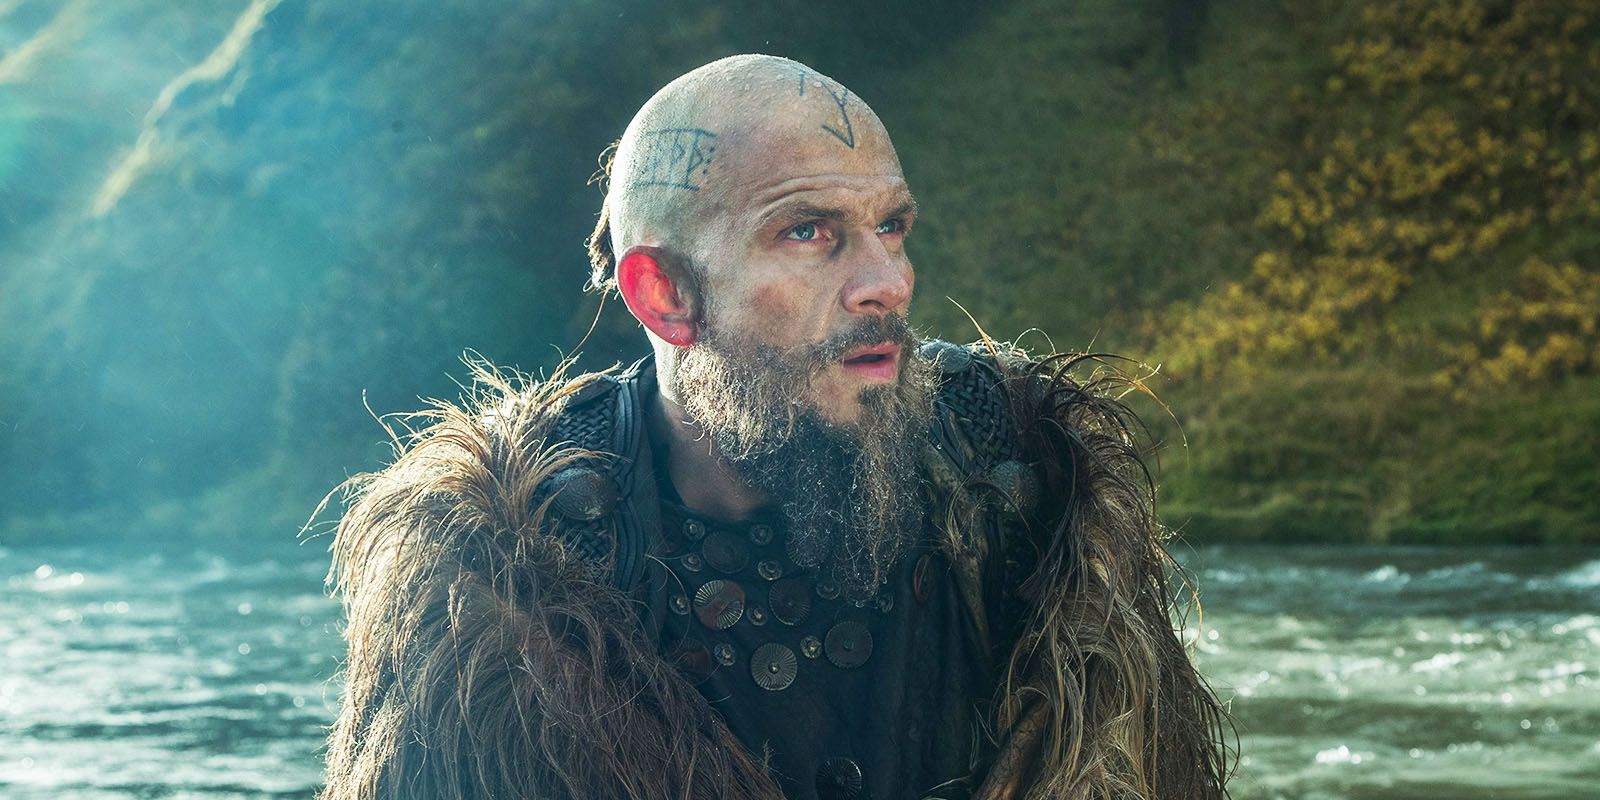 Vikings The Main Characters Ranked by Likability